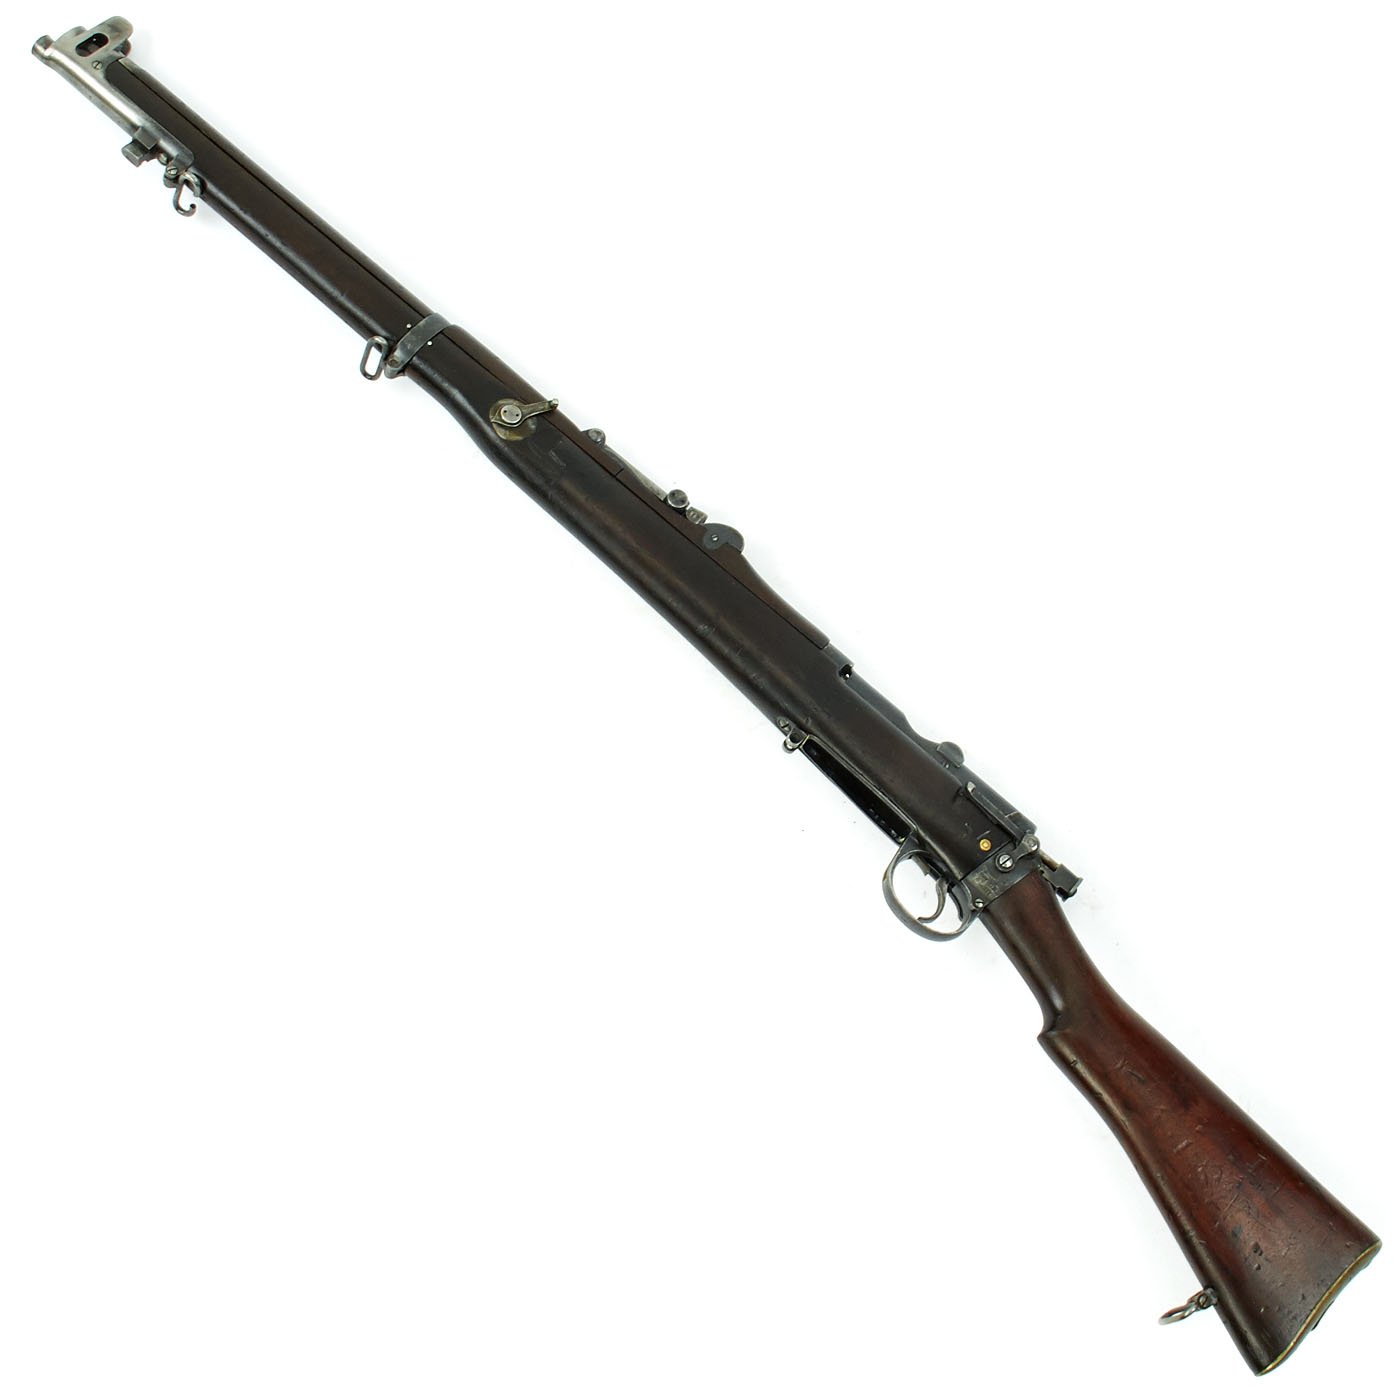 Lee Enfield rifles for sale - EFD Rifles - the Lee Enfield rifle specialists